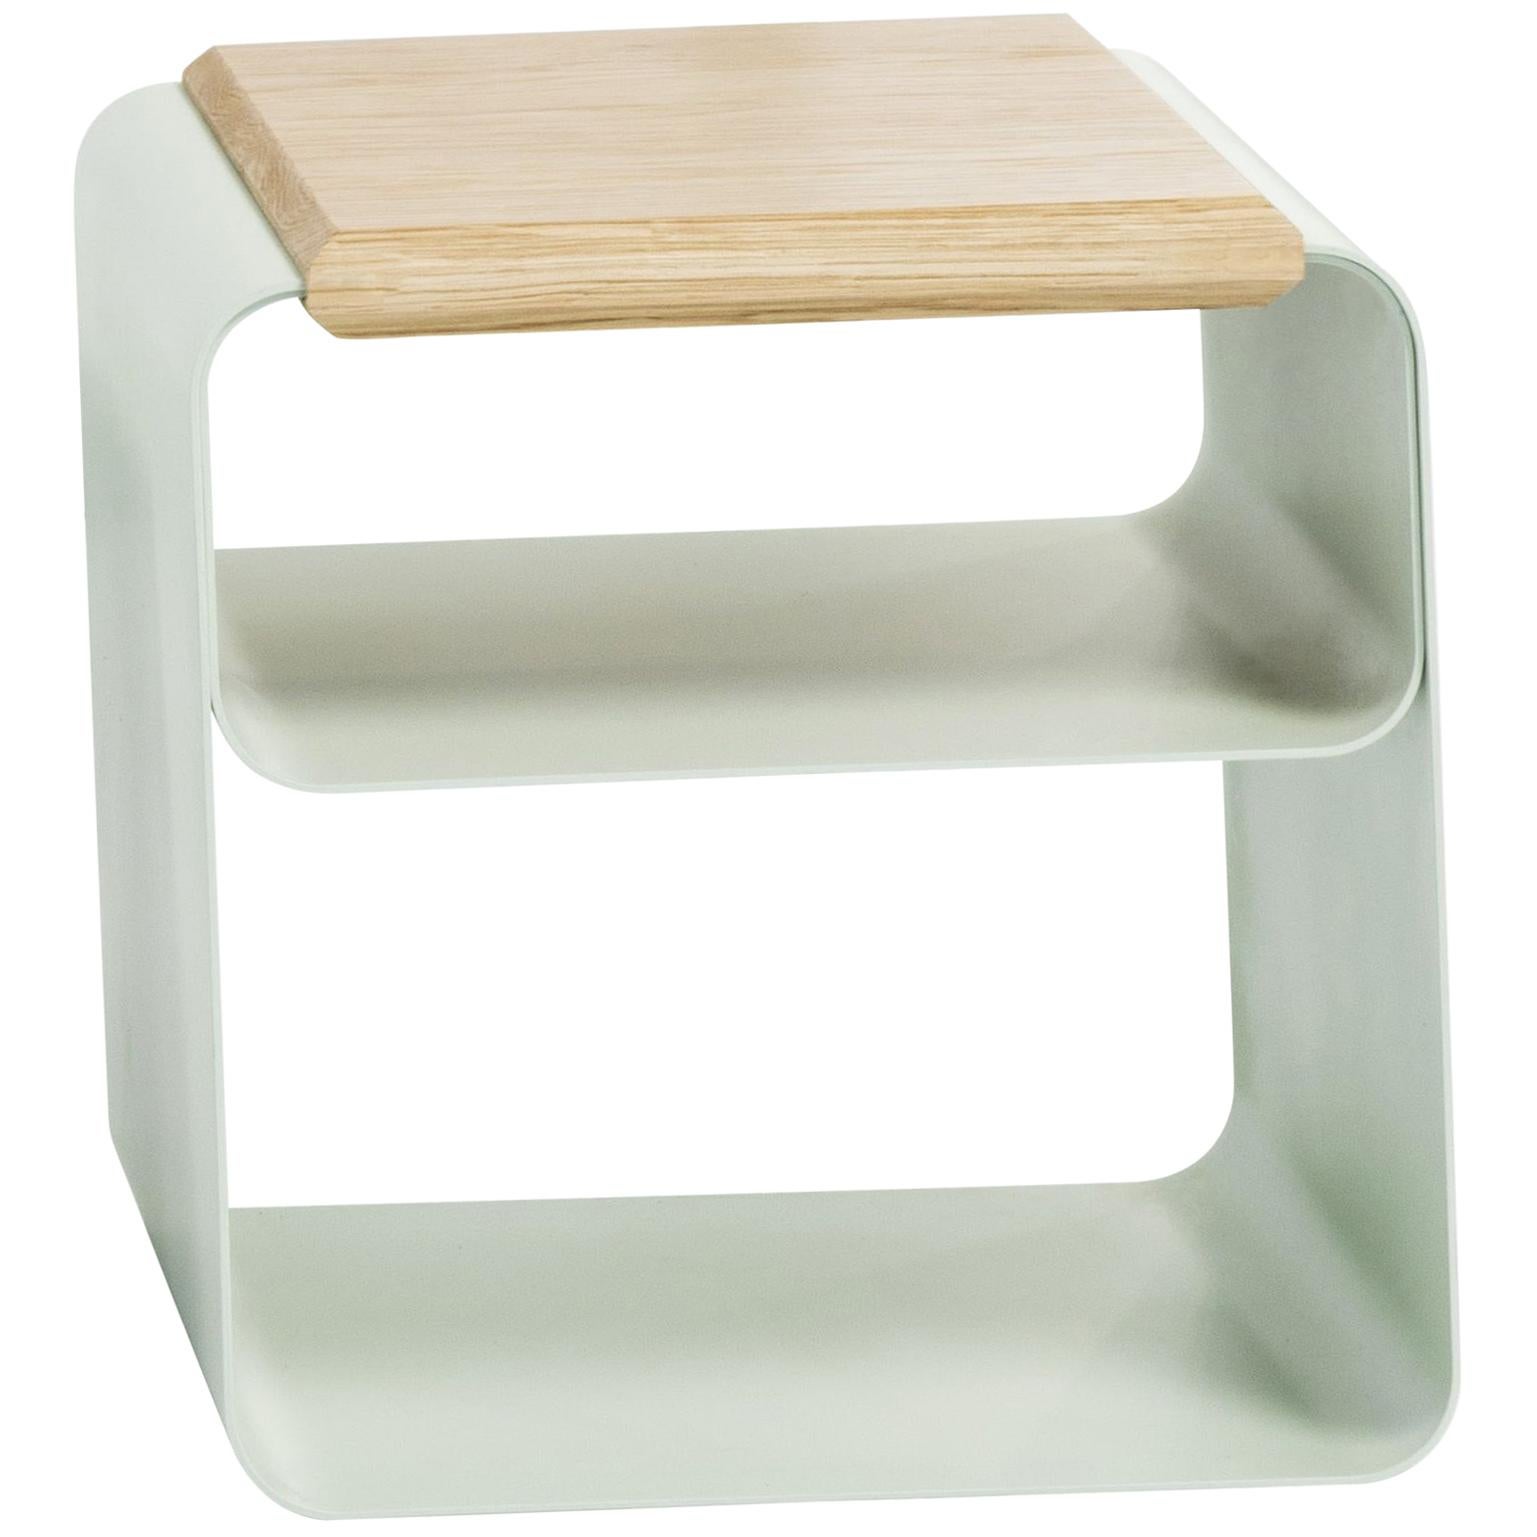 Bedside Table, coffee table, stool by AccardiBuccheri for Medulum